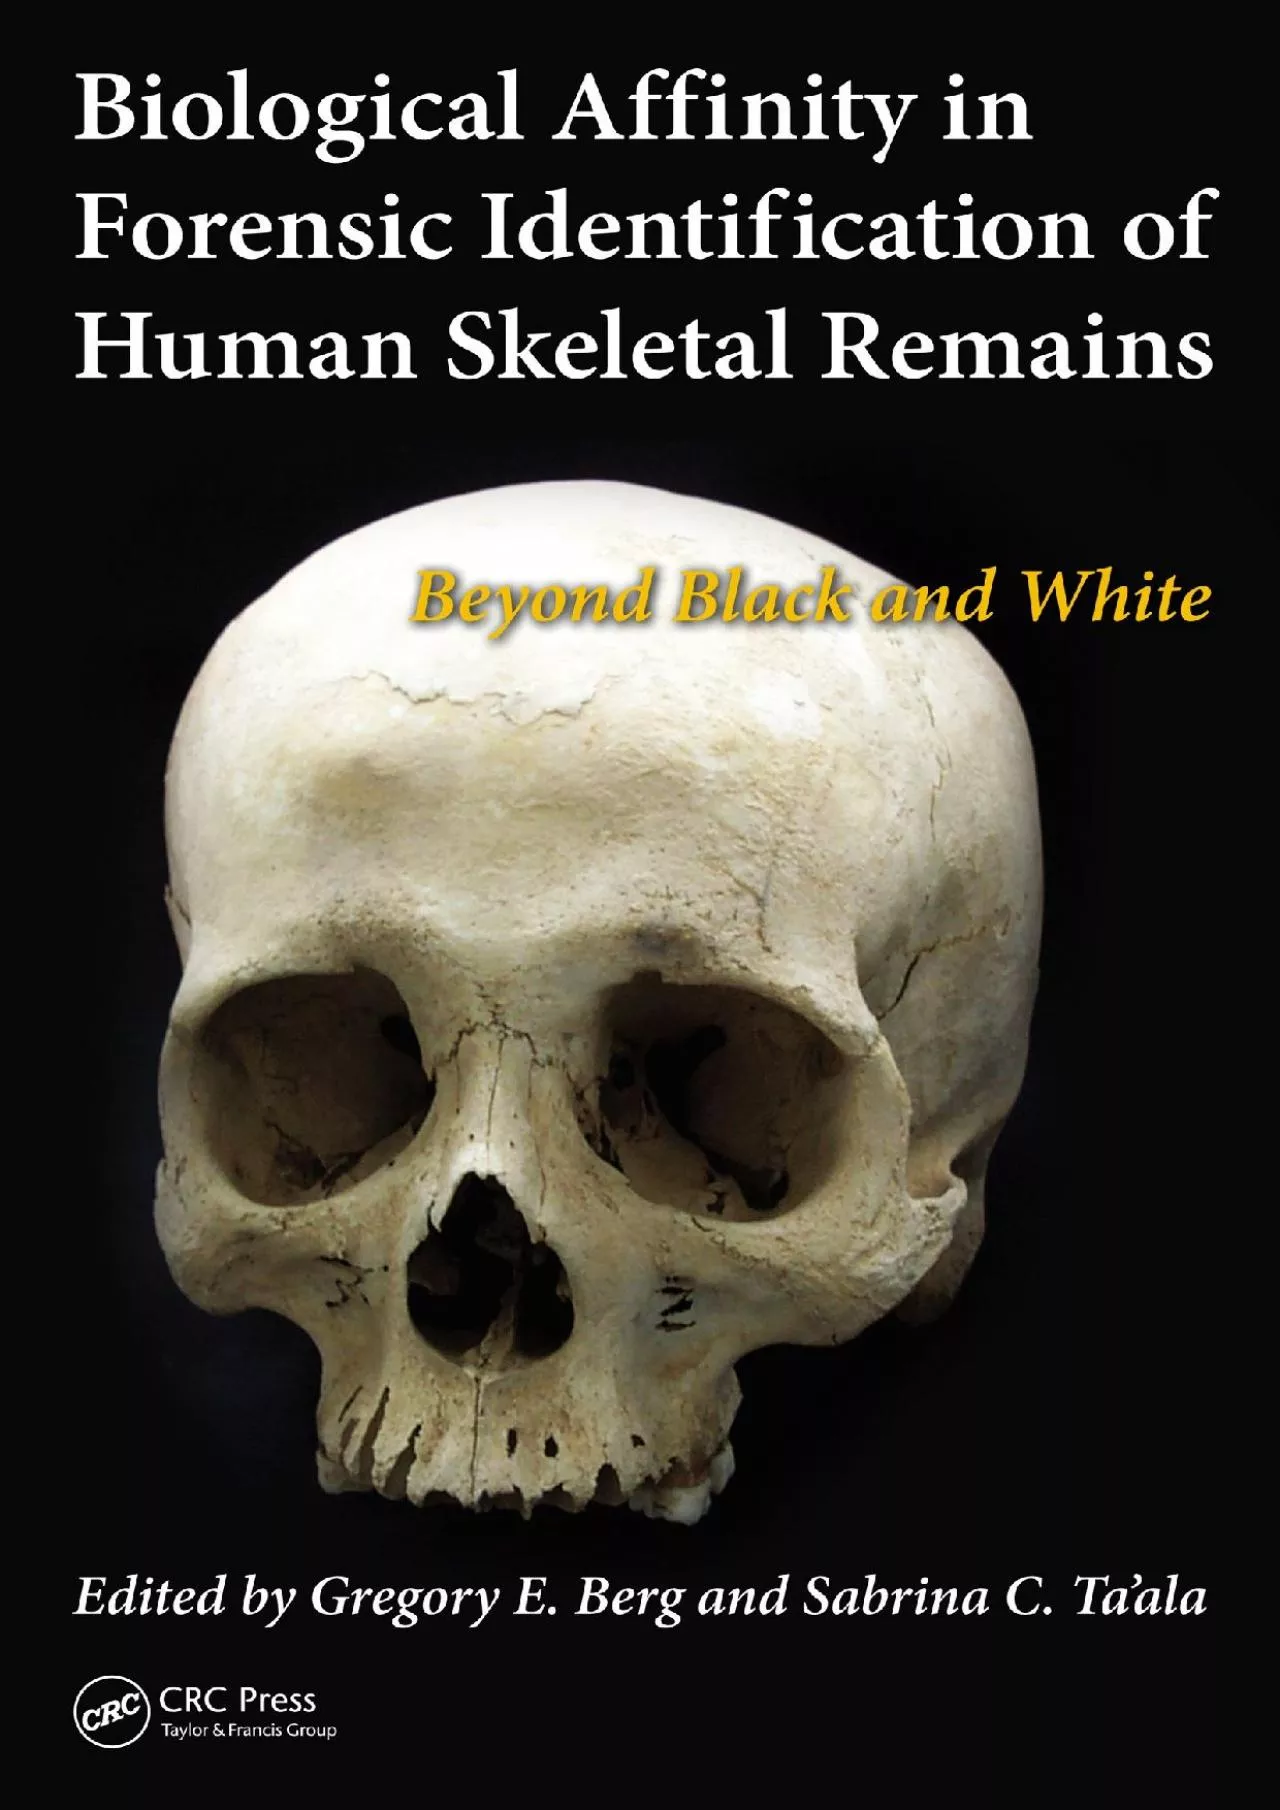 (BOOS)-Biological Affinity in Forensic Identification of Human Skeletal Remains: Beyond